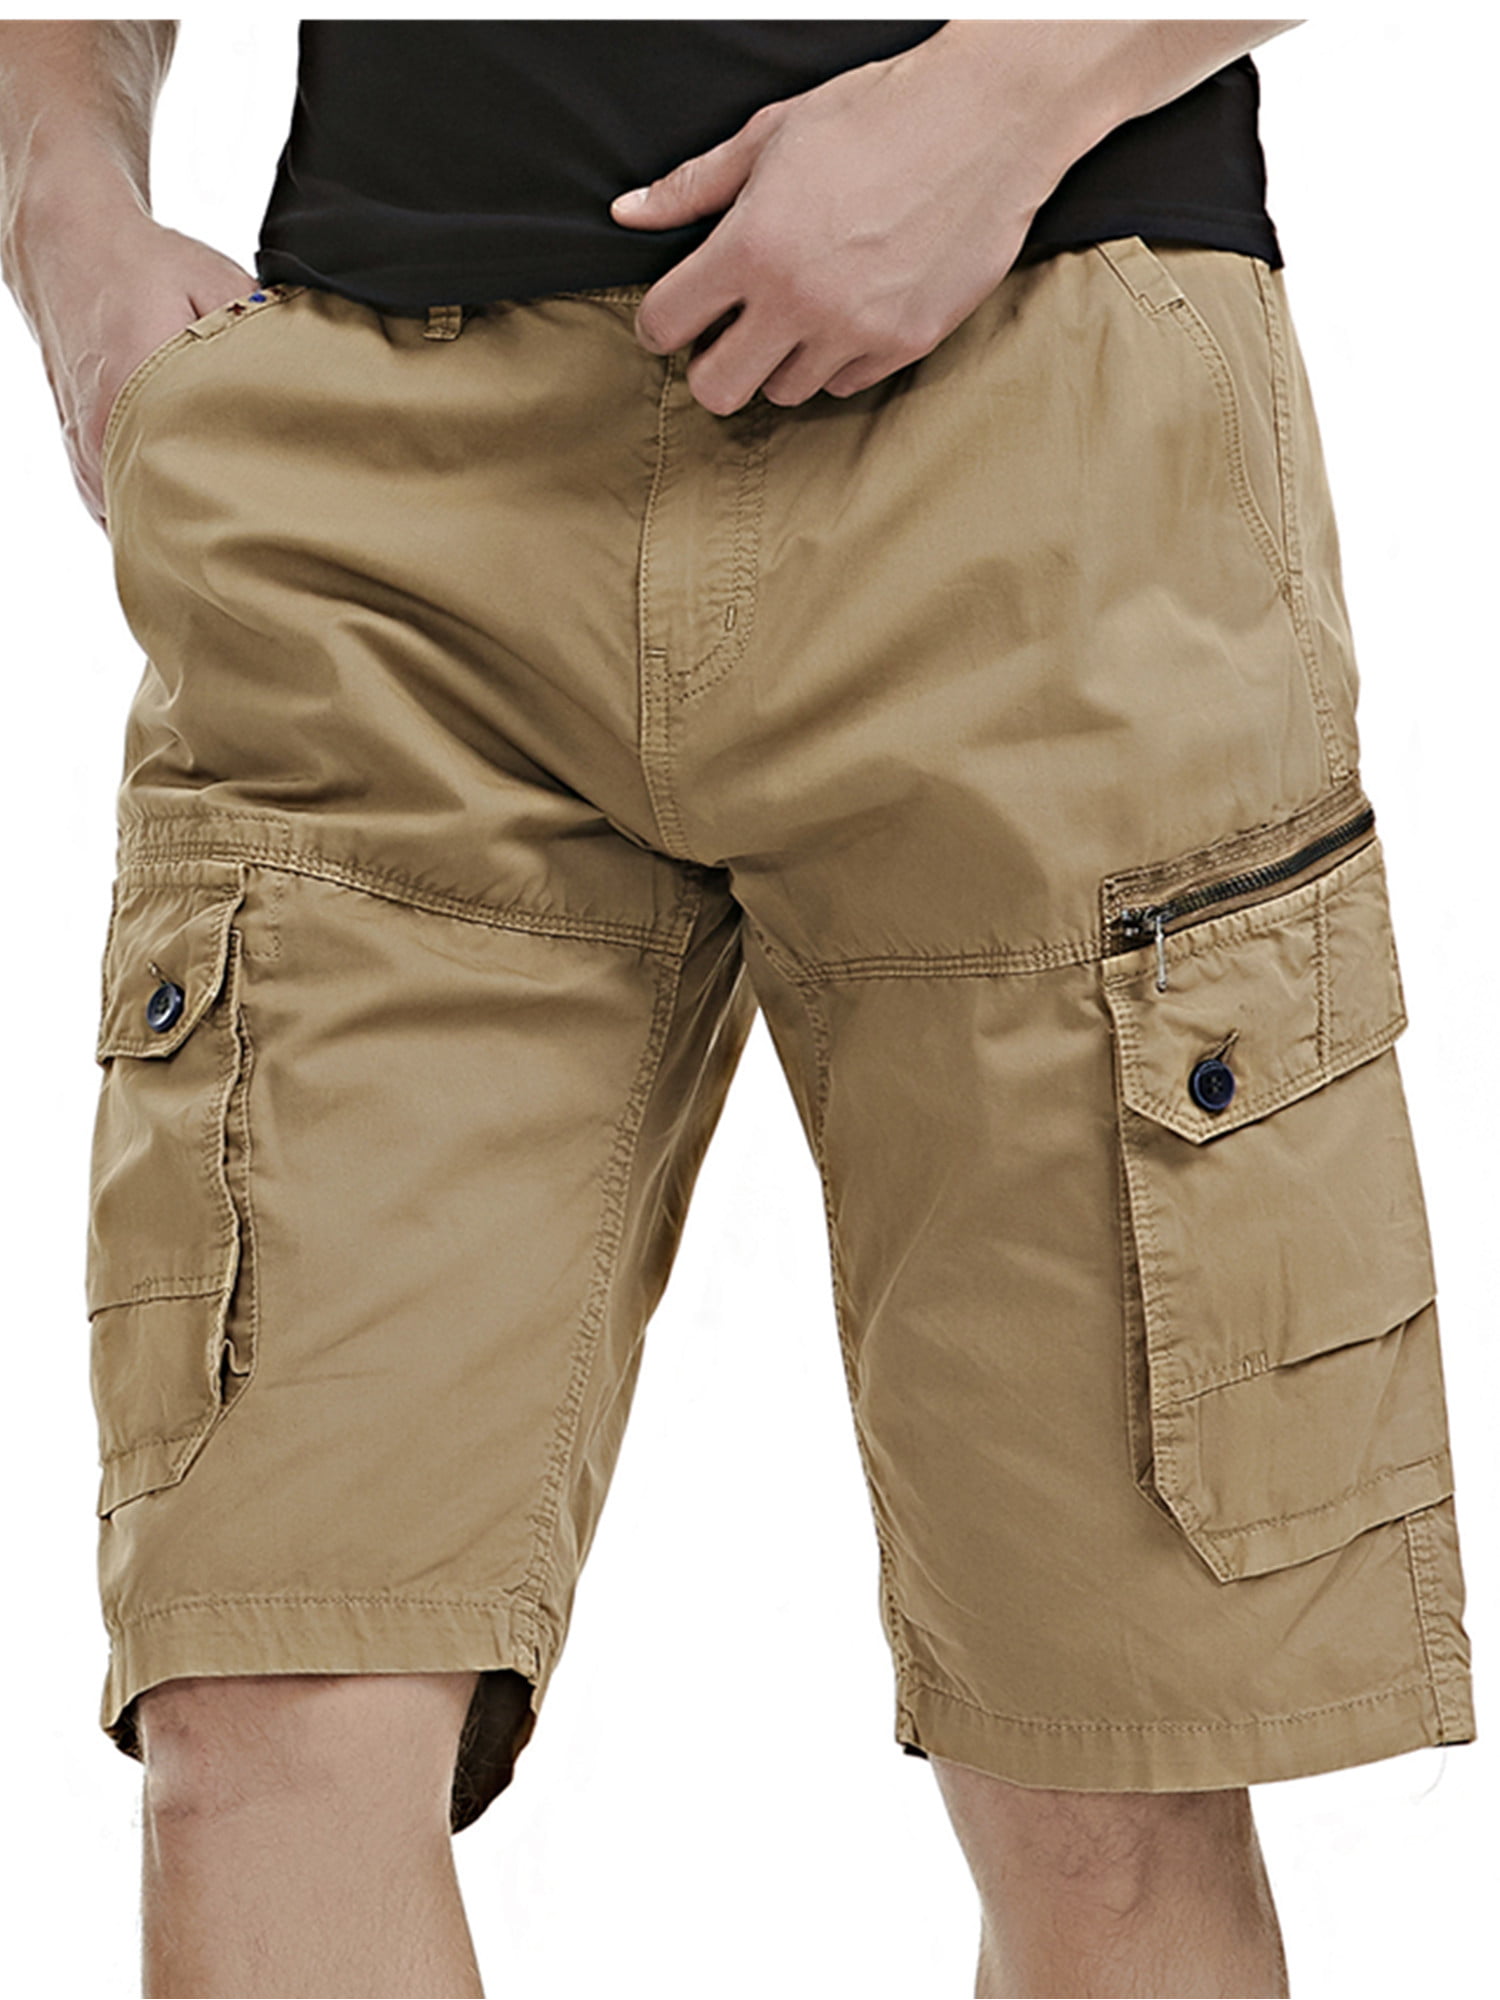 MAGCOMSEN Mens Summer Lightweigth Quick Dry Casual Shorts Outdoor Athleisure Cargo Shorts with Pockets 